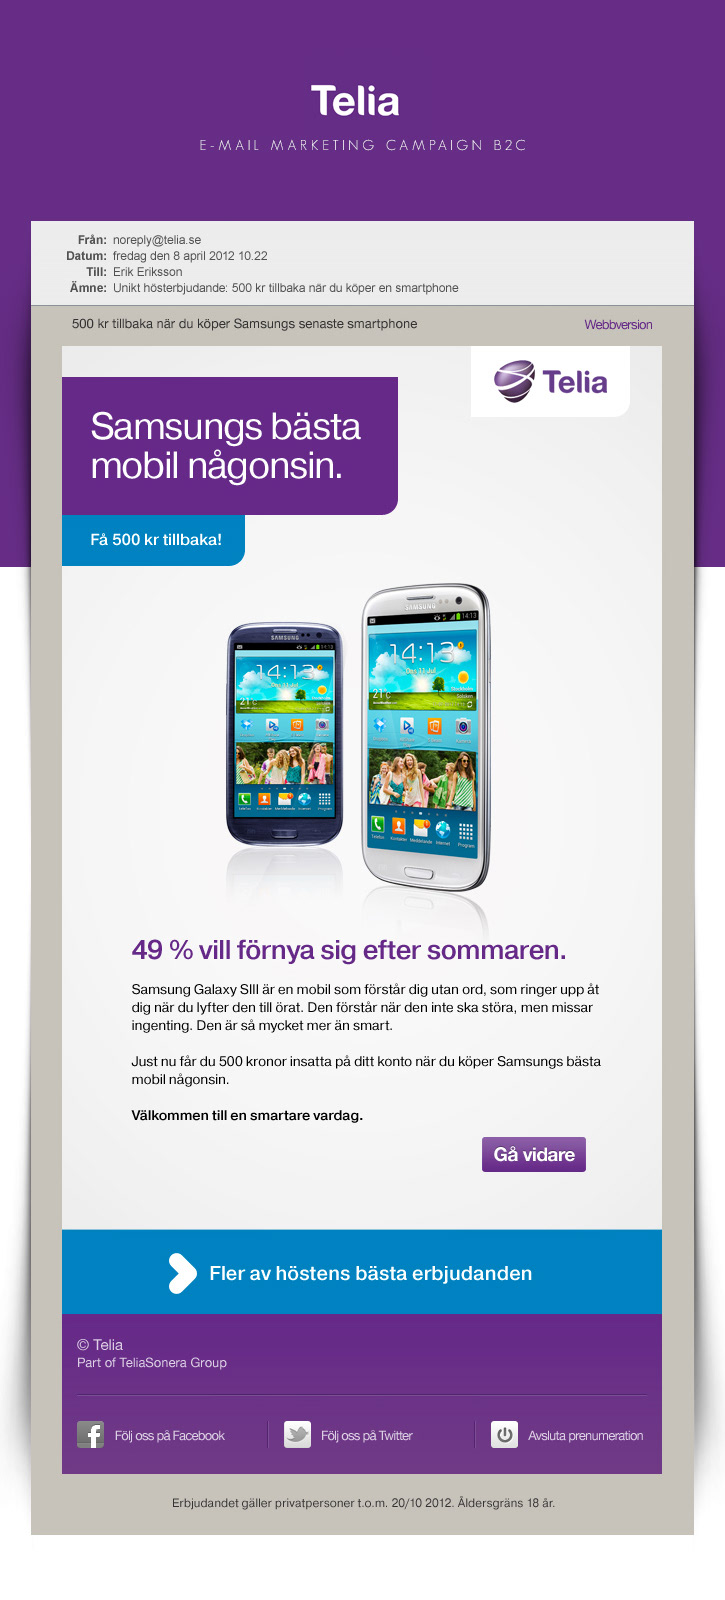 Telia Email email marketing Campaign B2C